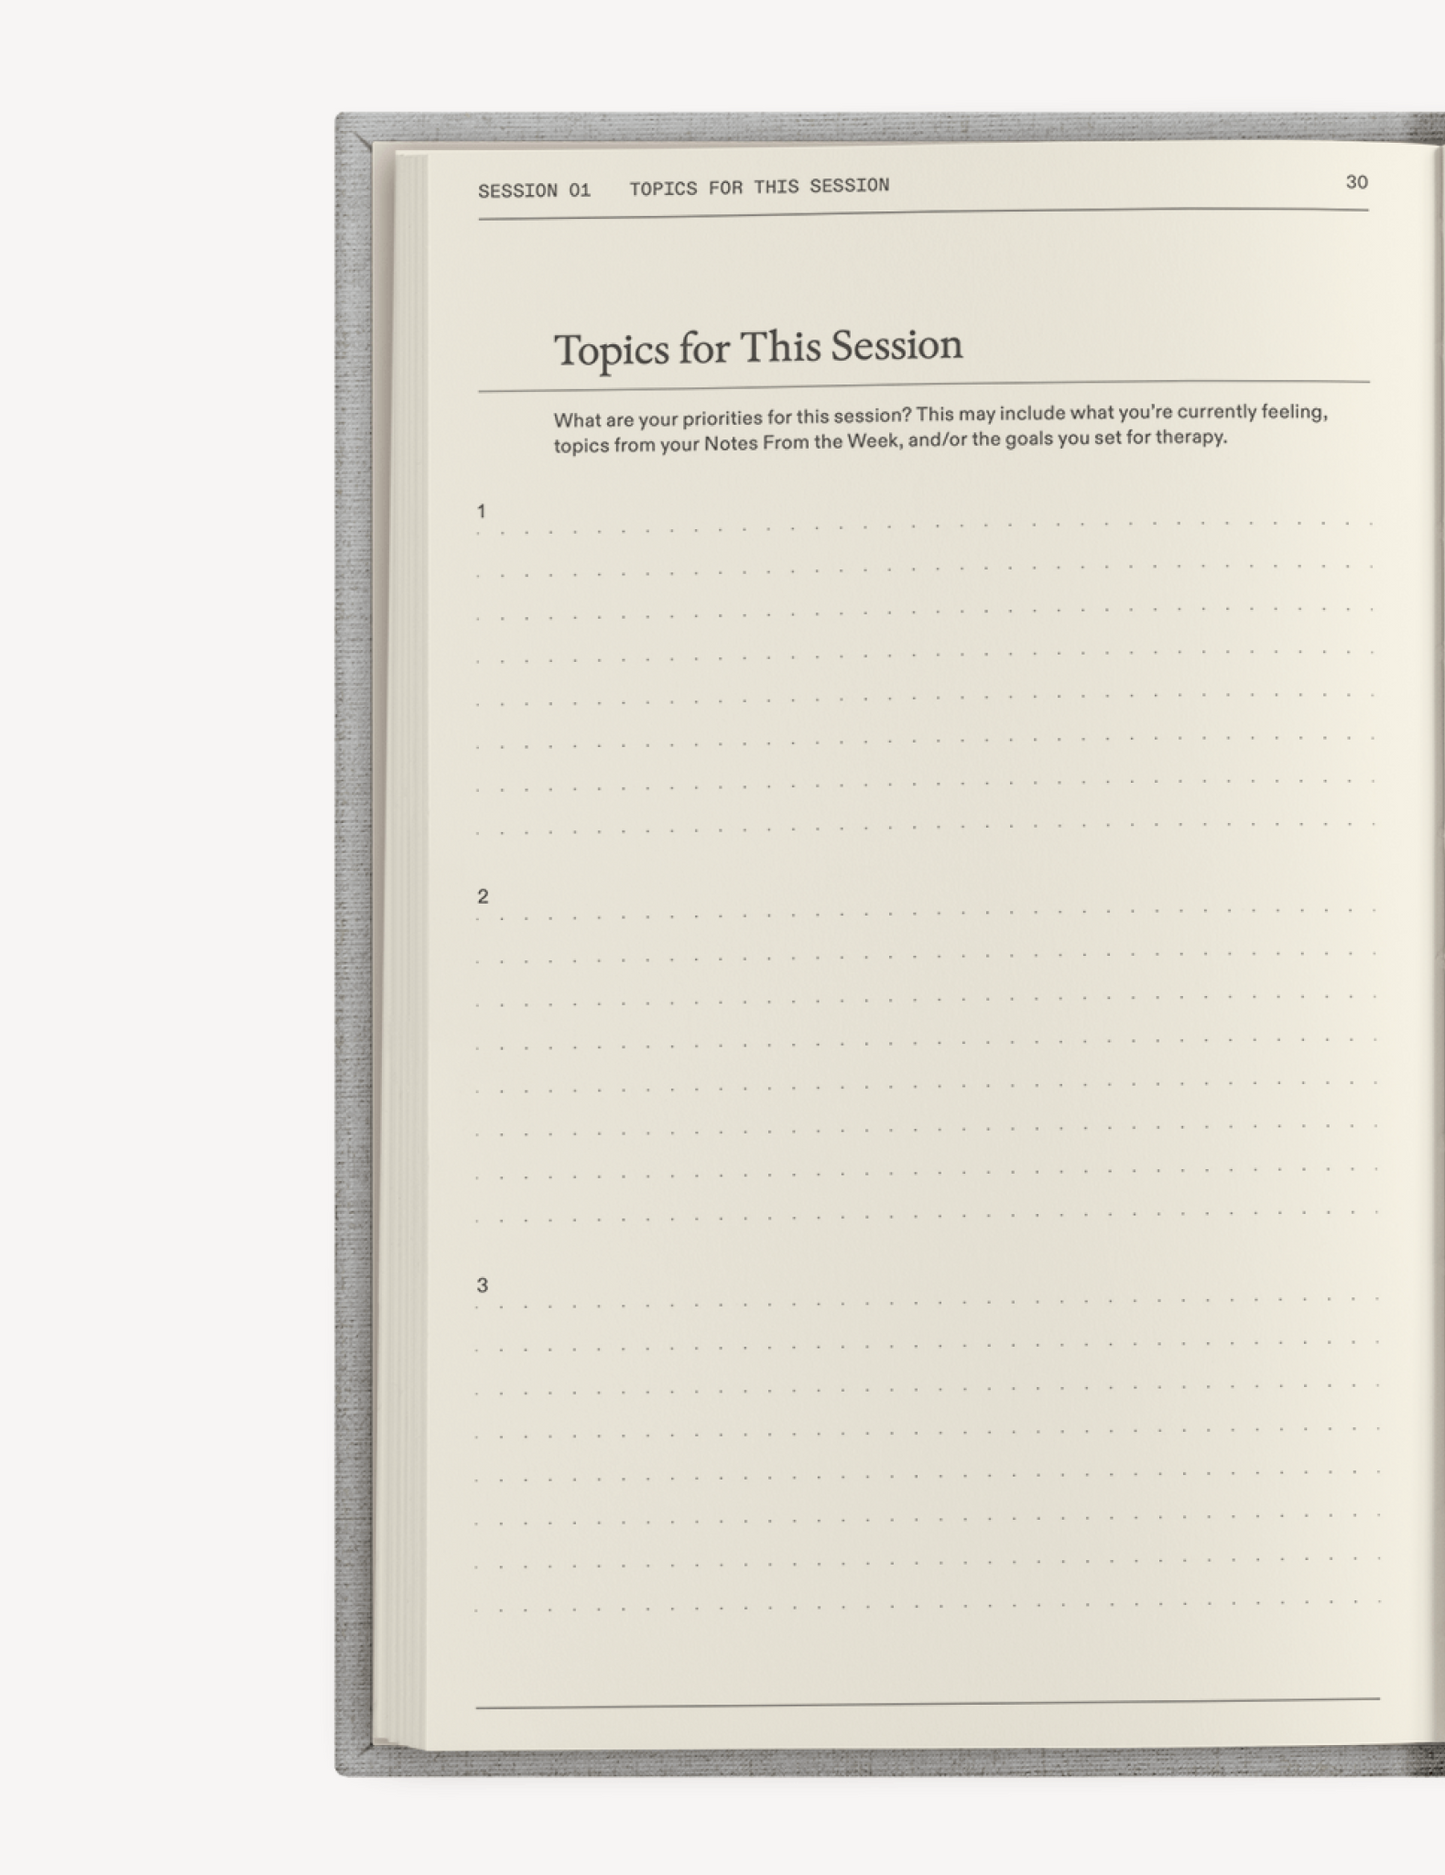 The Everyday Self-Care Set by Therapy Notebooks